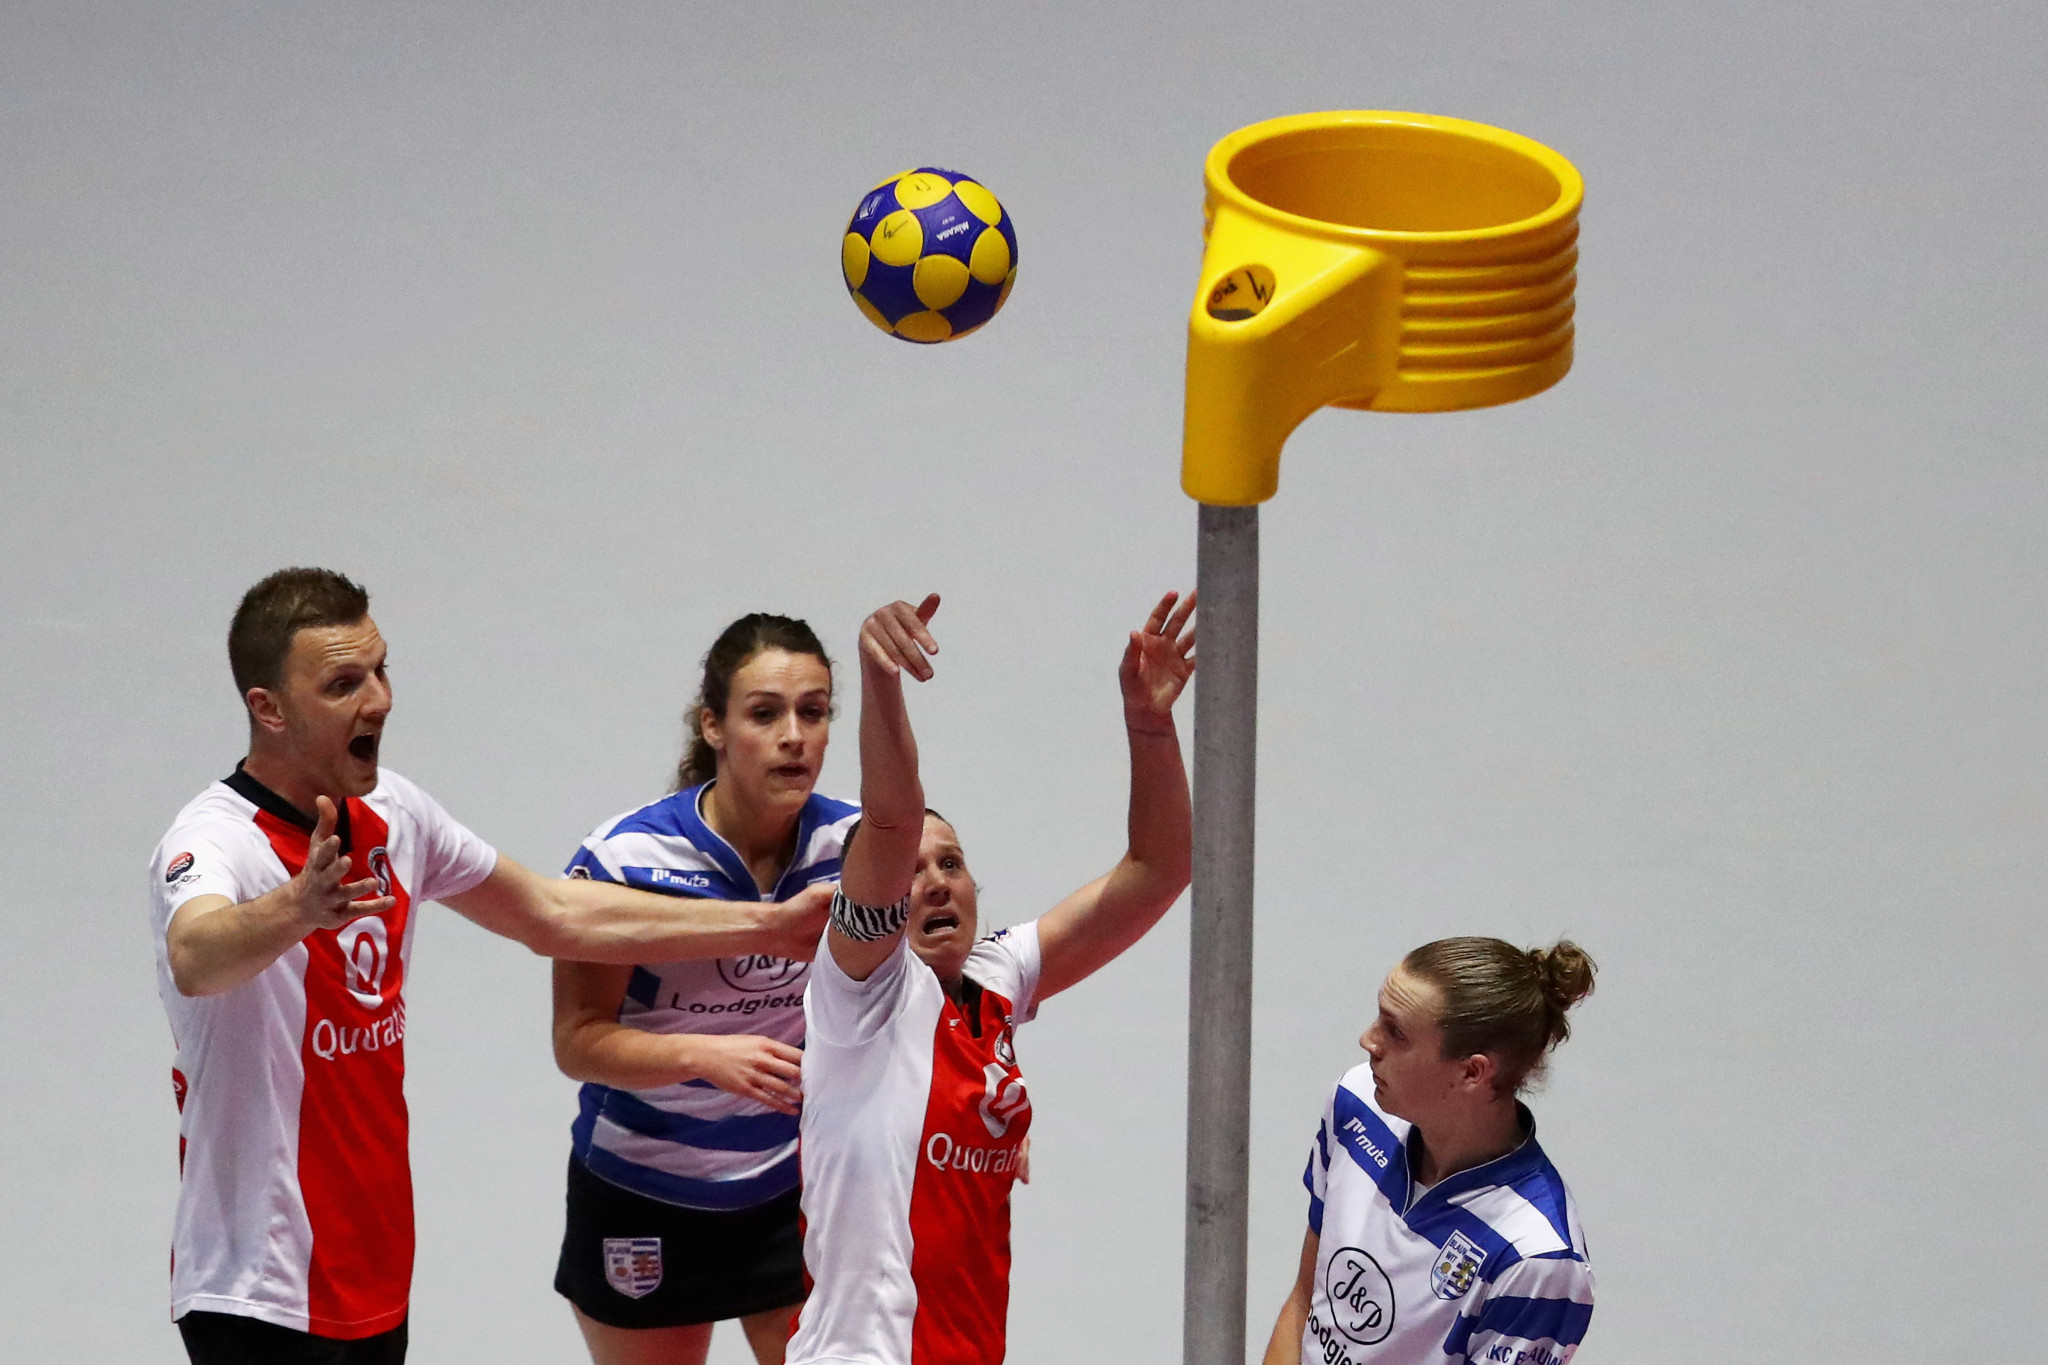 Rodrigues e Sousa appointed project manager for korfball's Olympic Format Taskforce